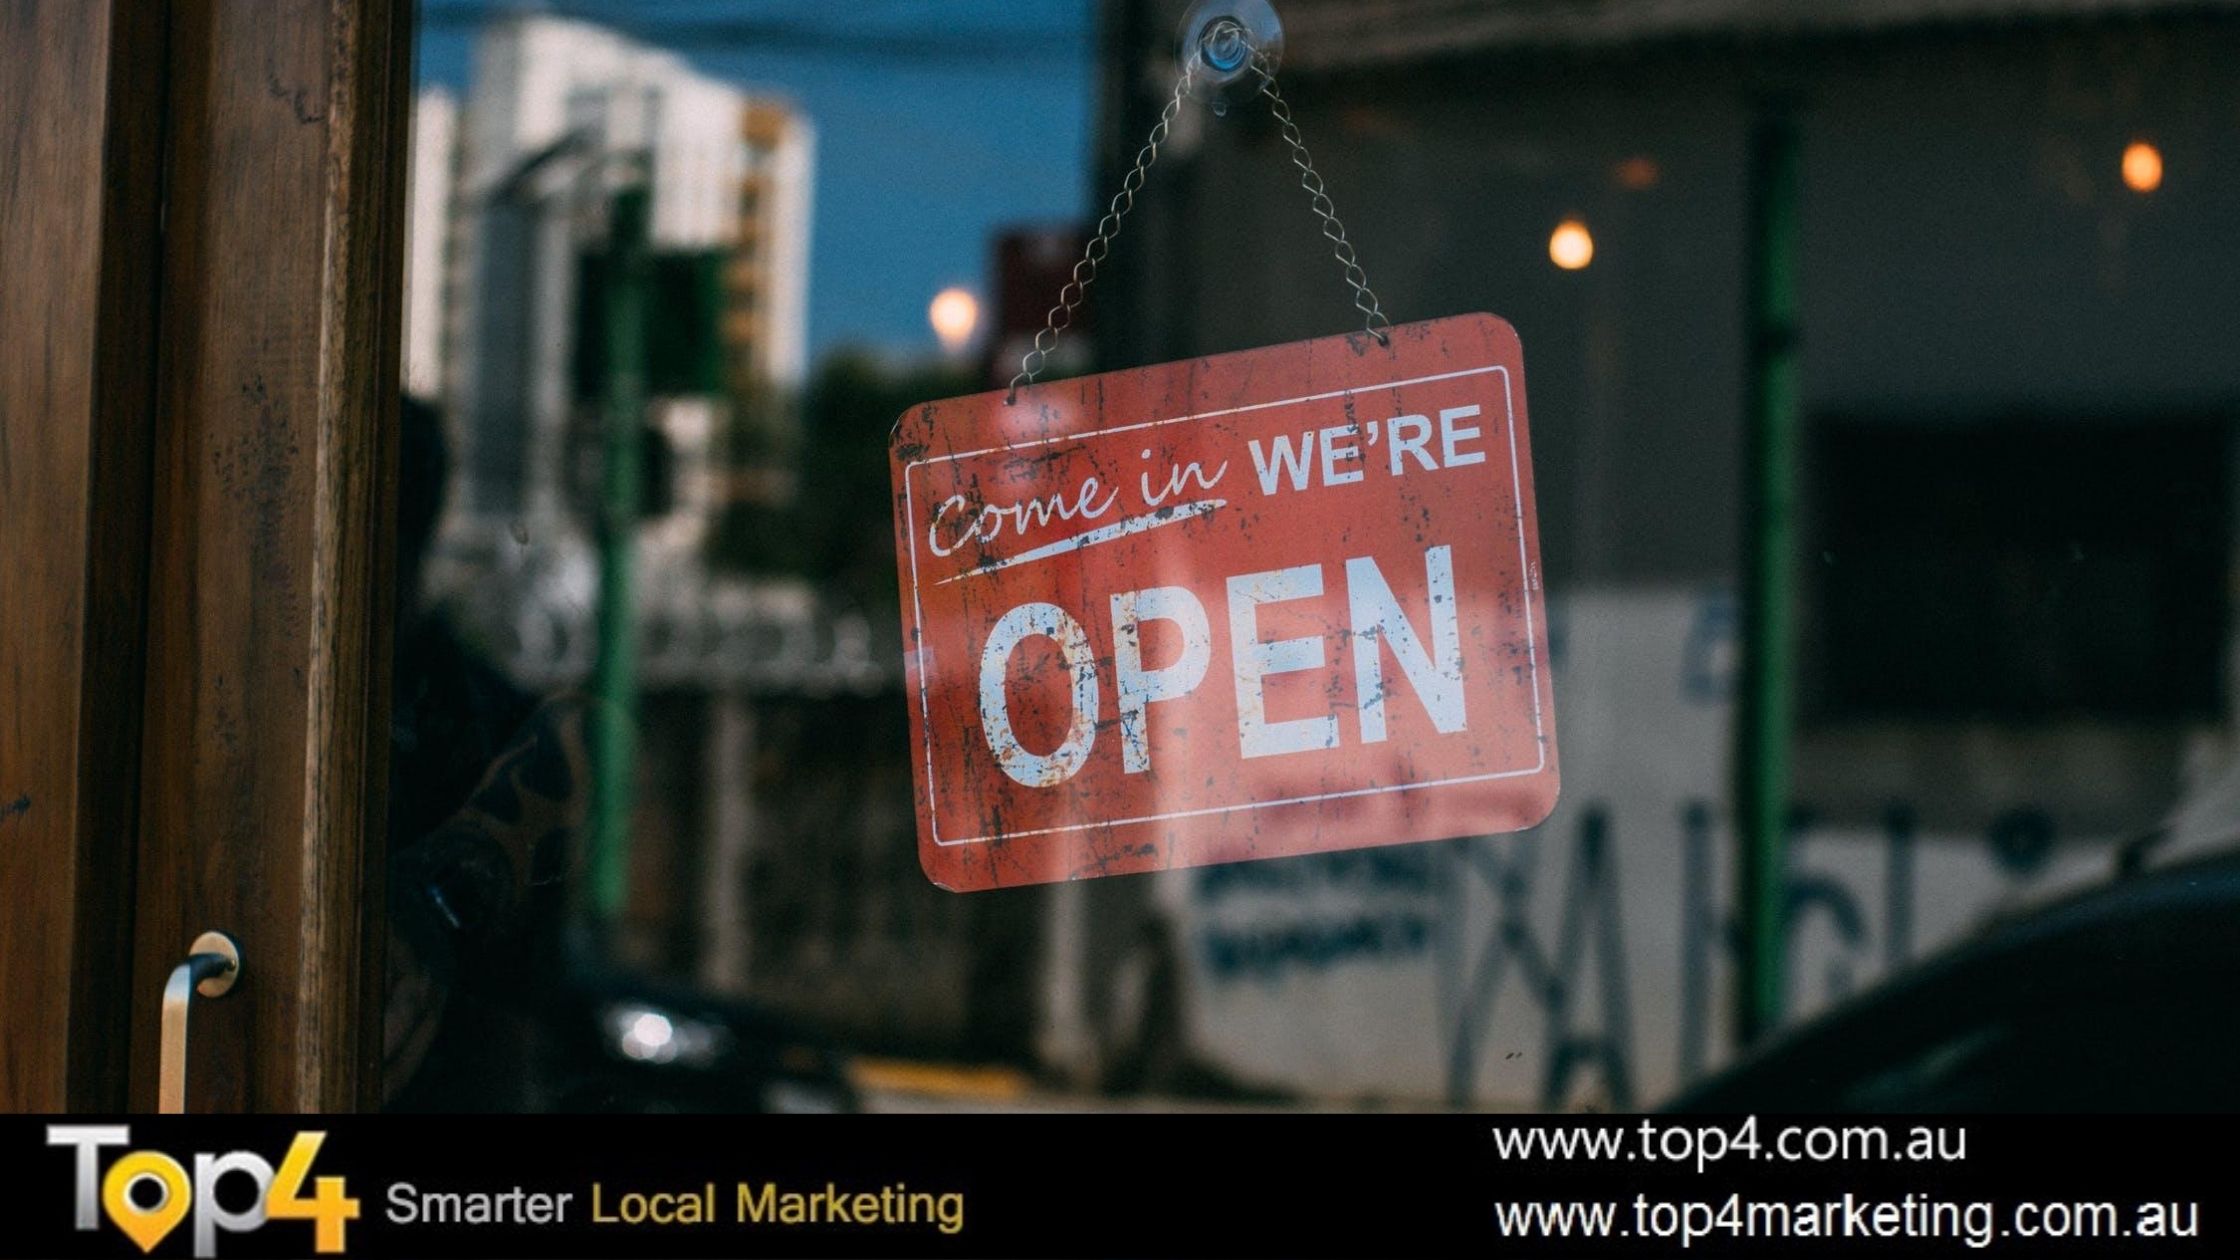 Support Small Businesses - Top4 Marketing